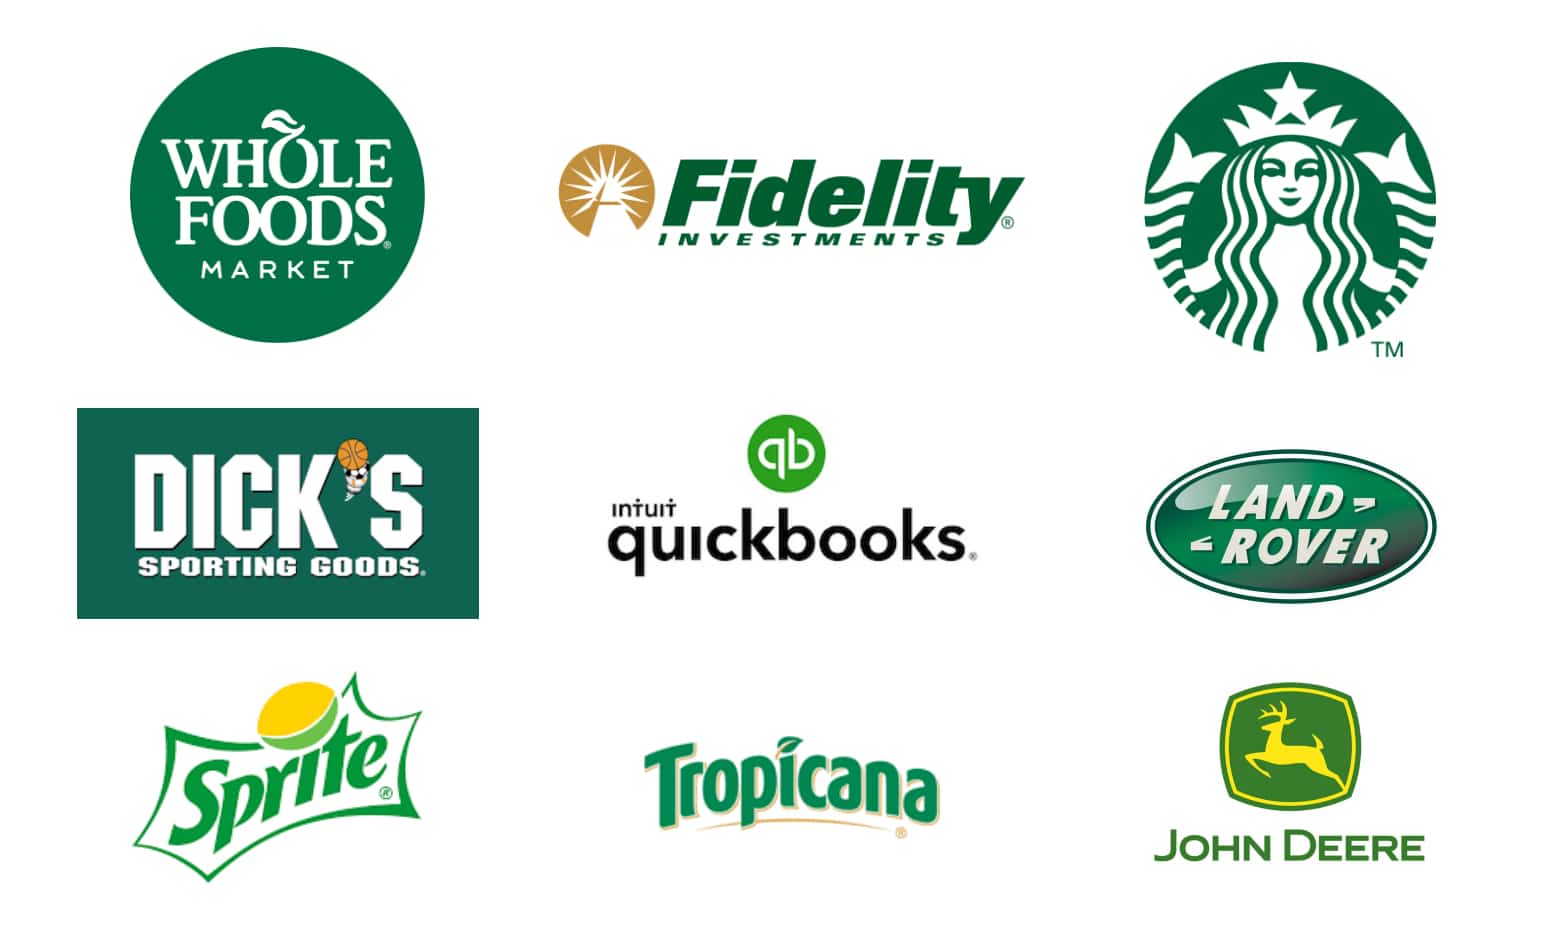 Green as a brand color on Collection of green logos showing Starbucks and Whole Foods by Stellen Design Branding Agency in Los Angeles CA